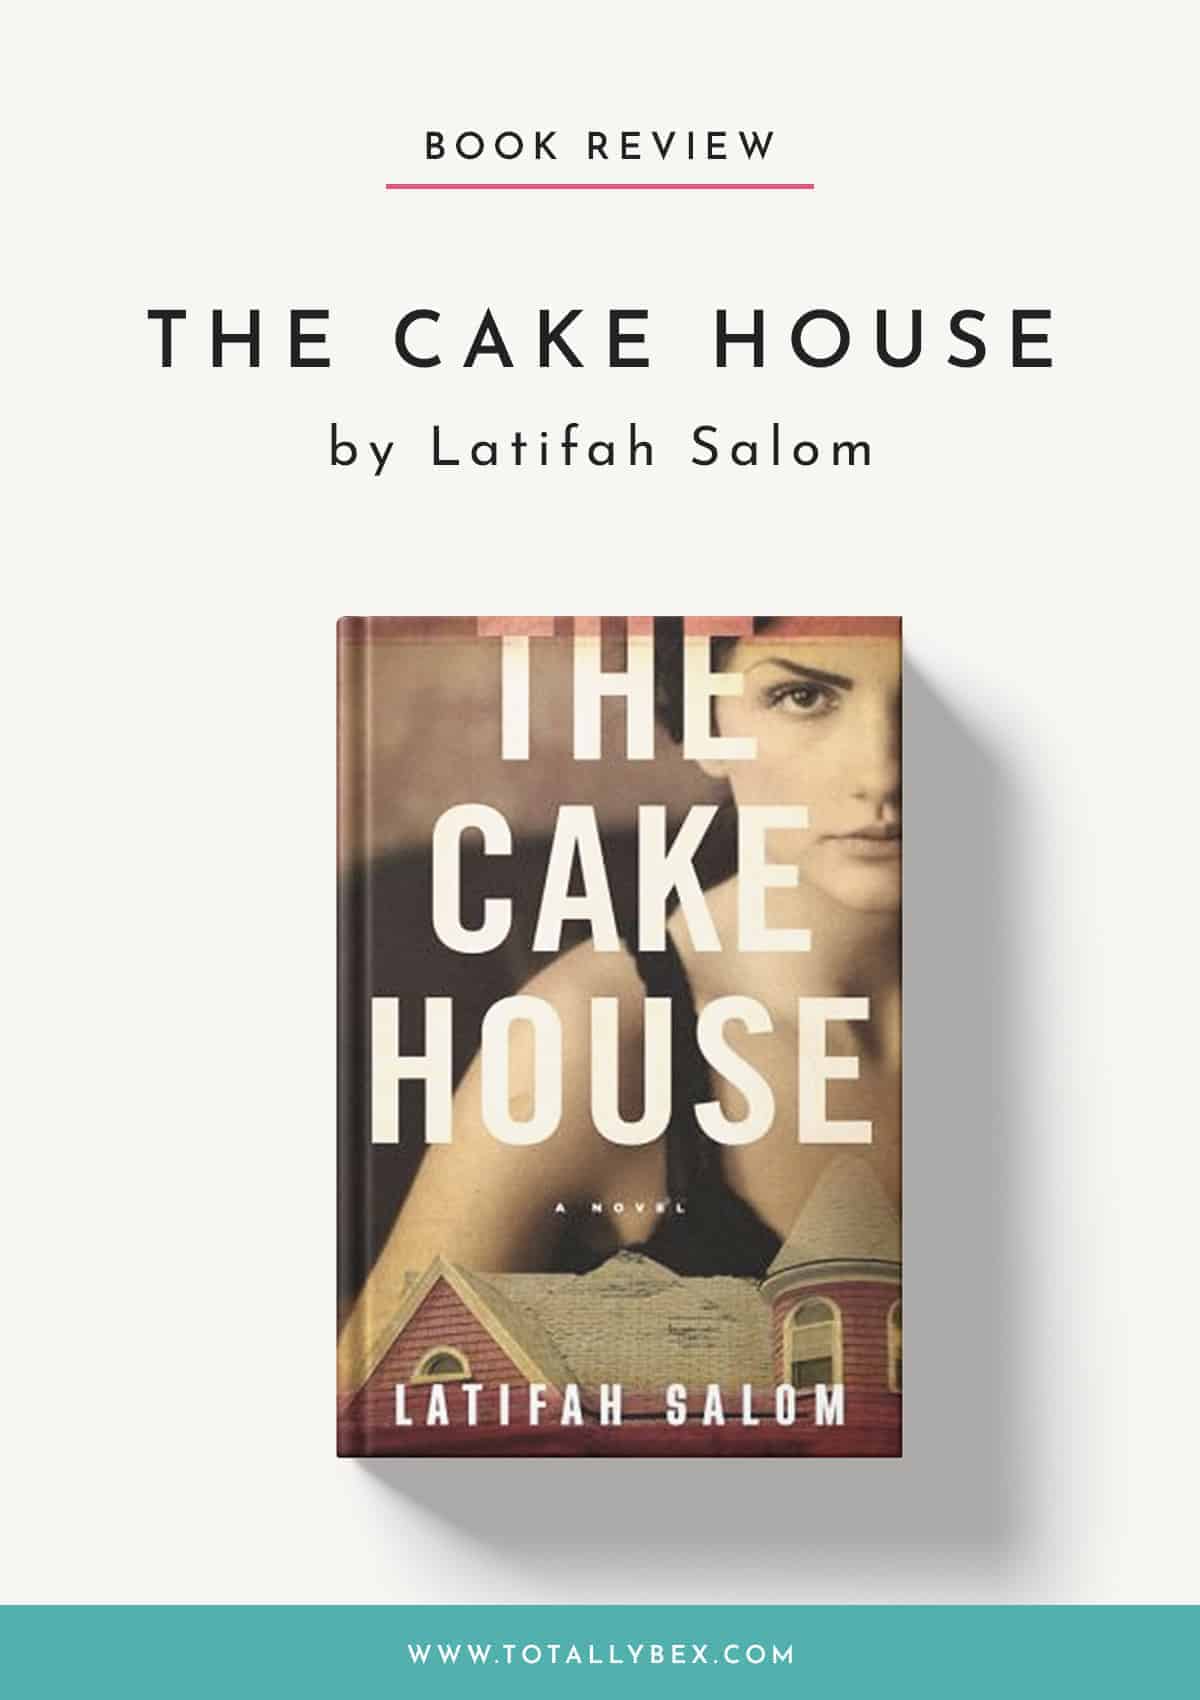 The Cake House by Latifah Salom – My Review